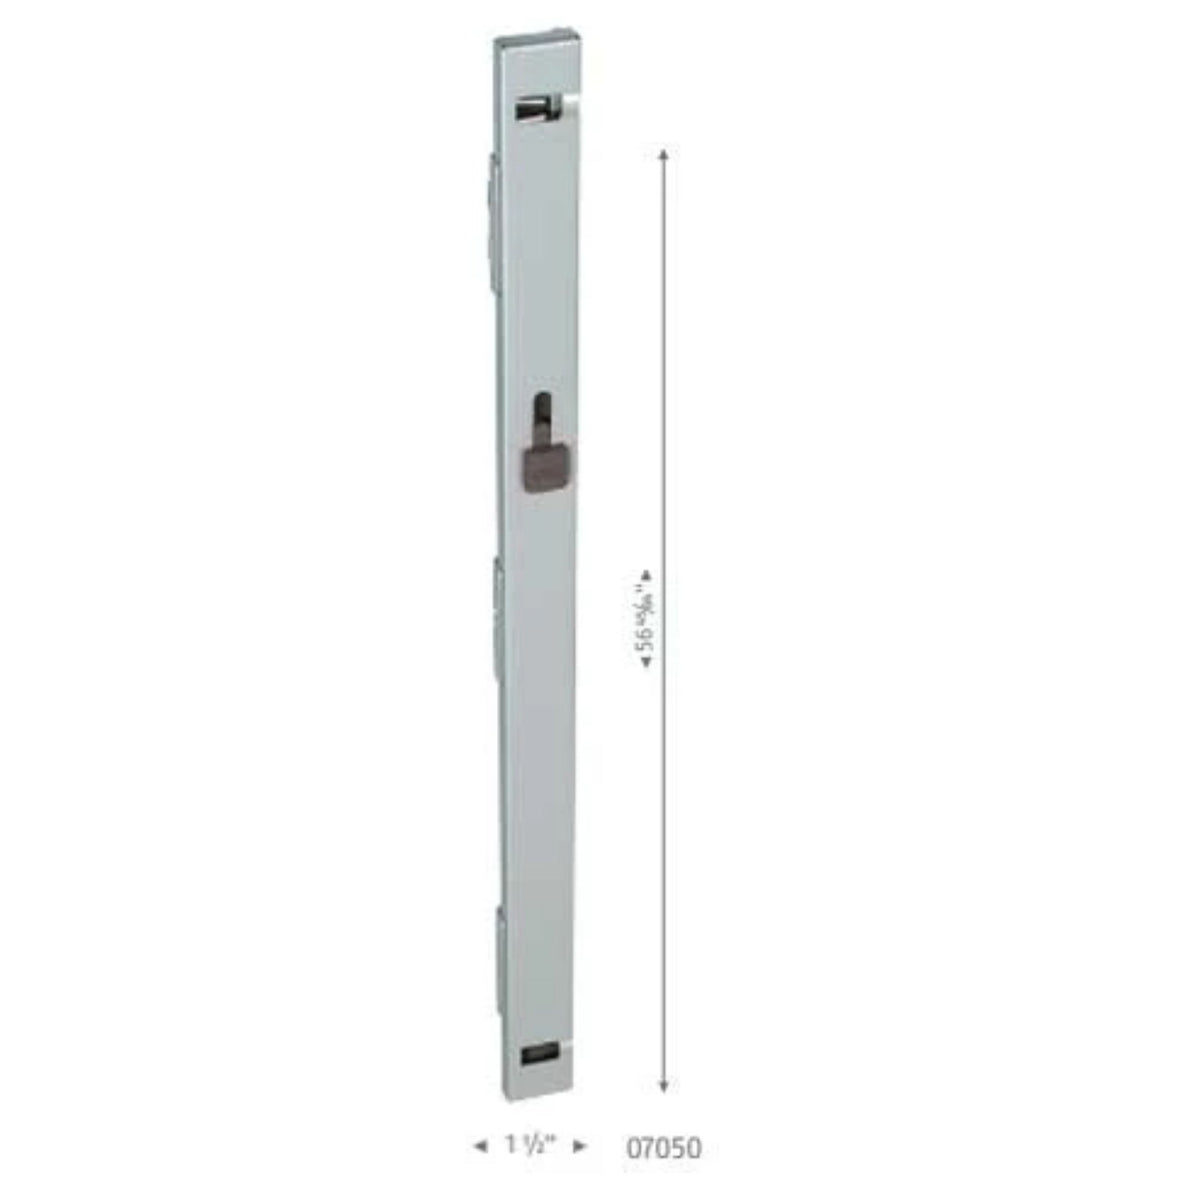 Abus 5-Drawer File Cabinet Lock (07050) - The Lock Source